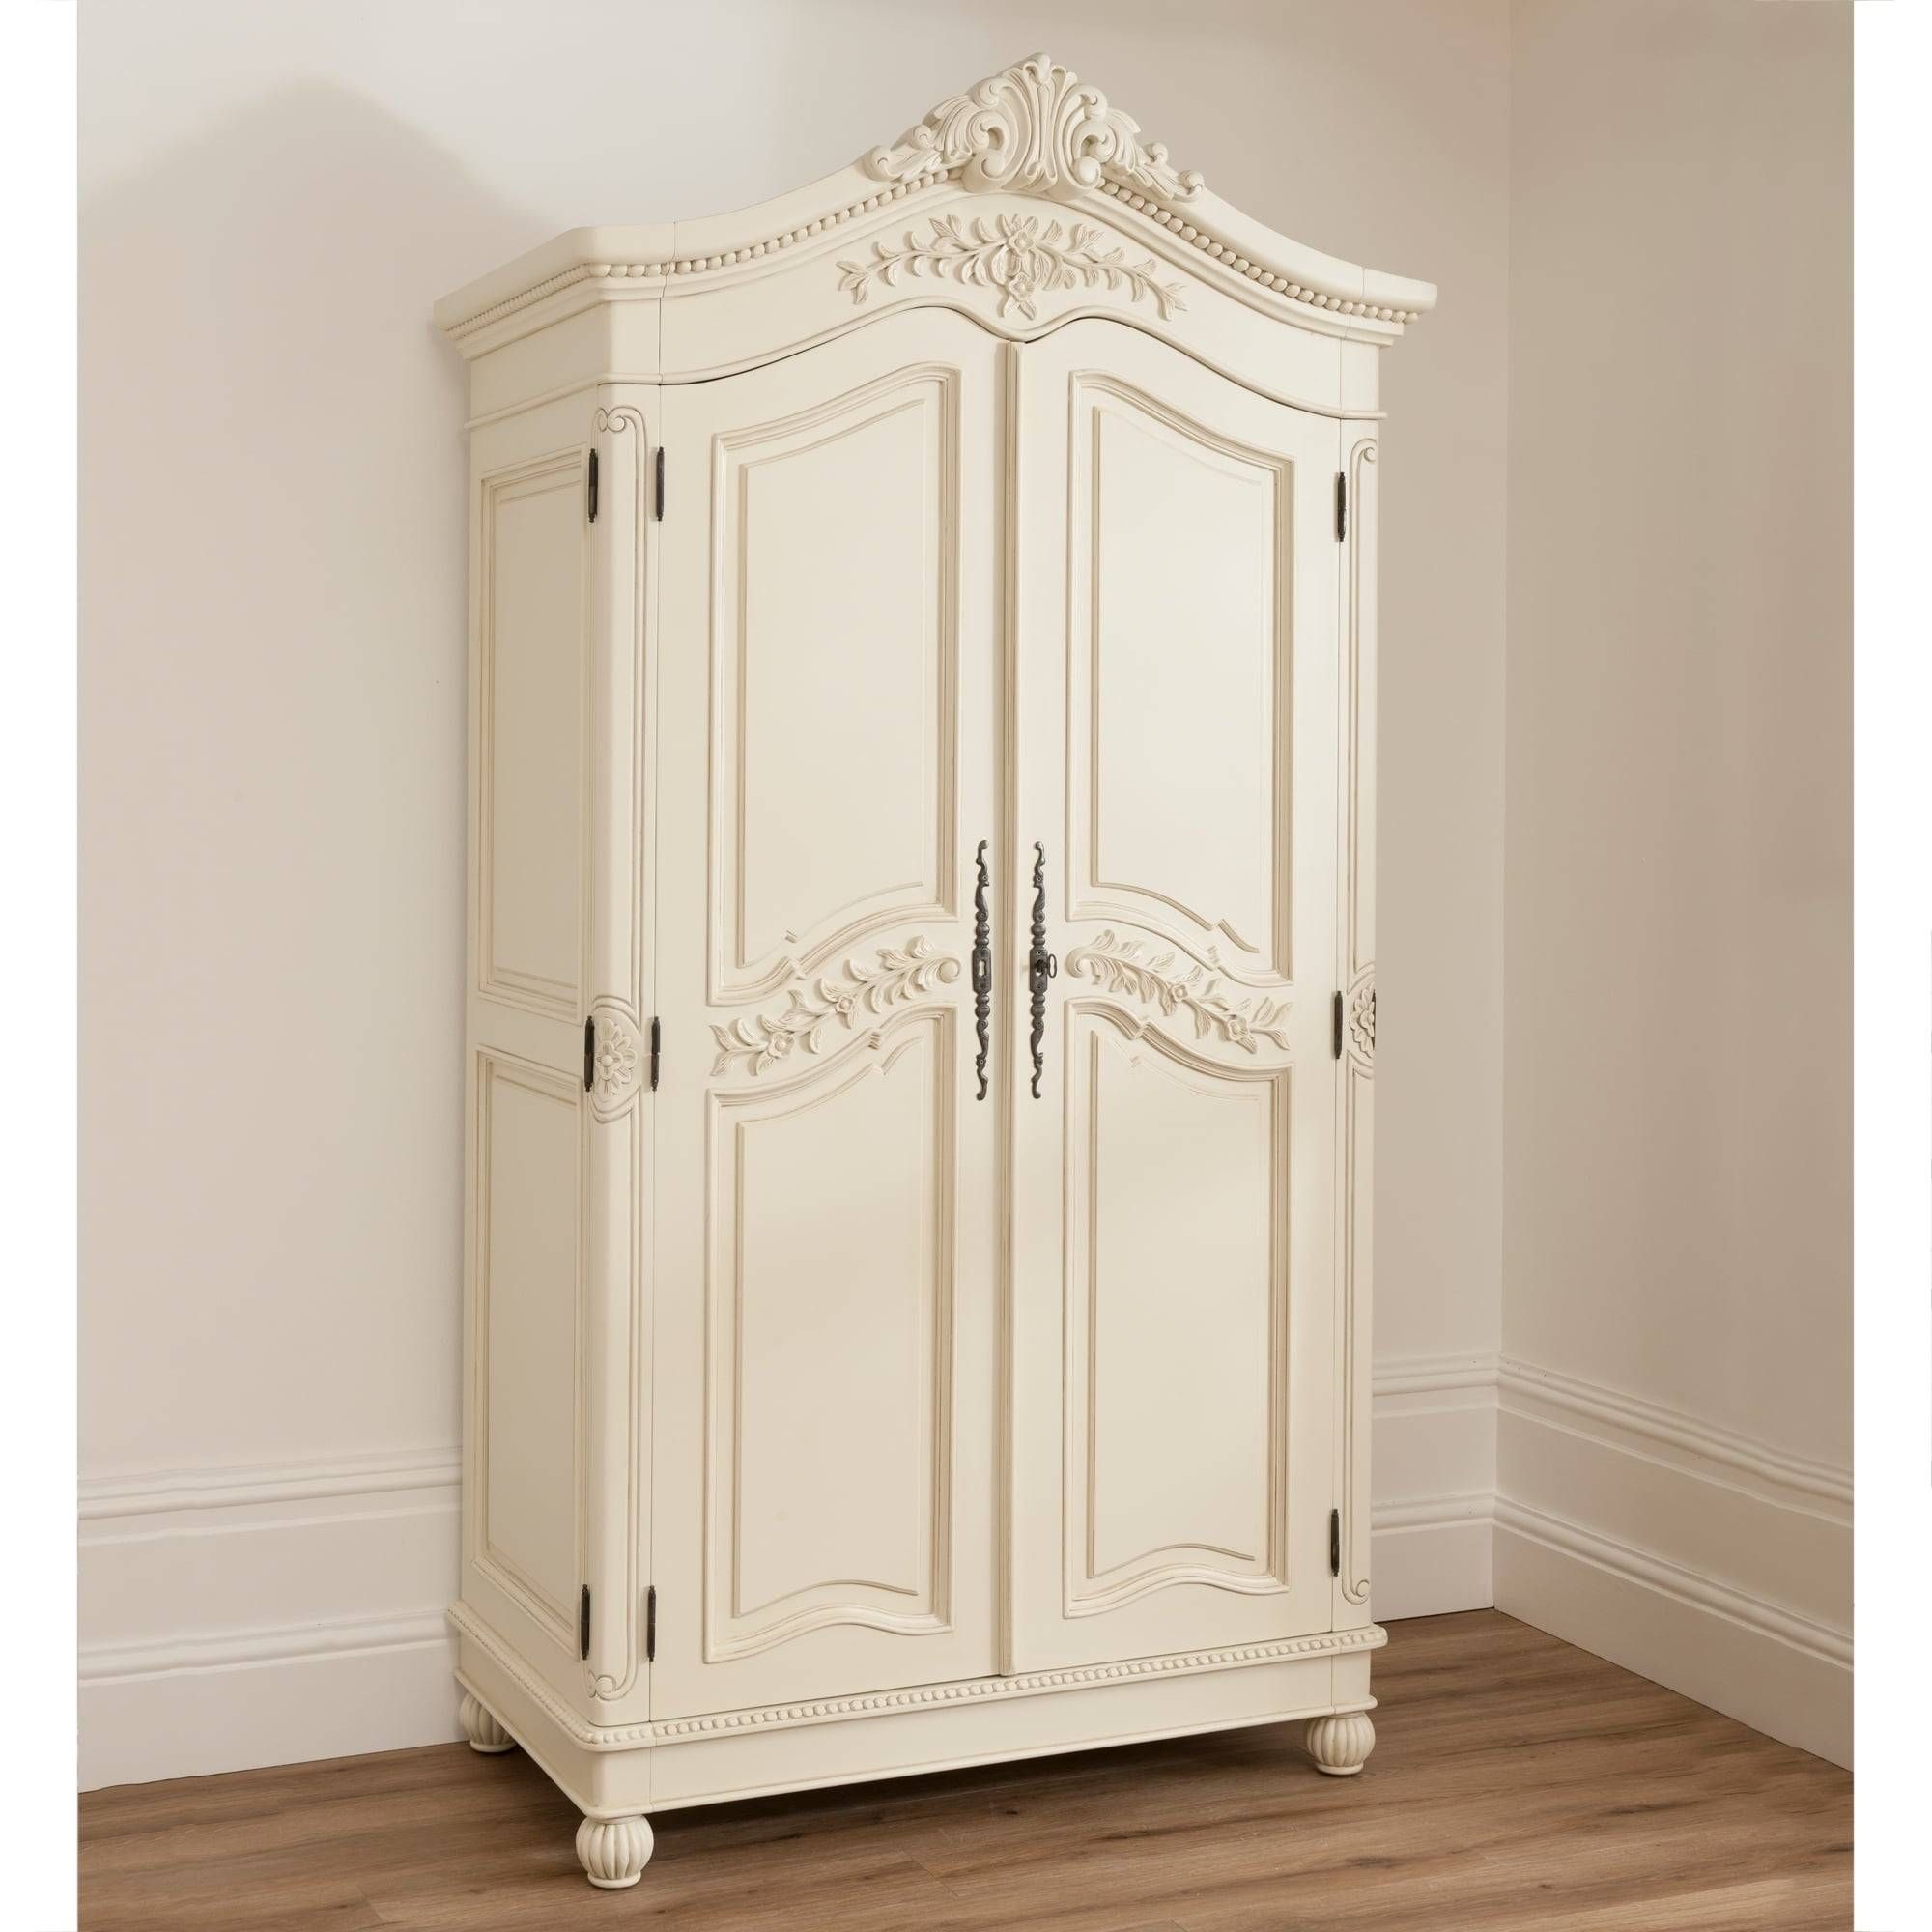 Bordeaux Ivory Shabby Chic Wardrobe | Shabby Chic Furniture In French Shabby Chic Wardrobes (View 4 of 15)